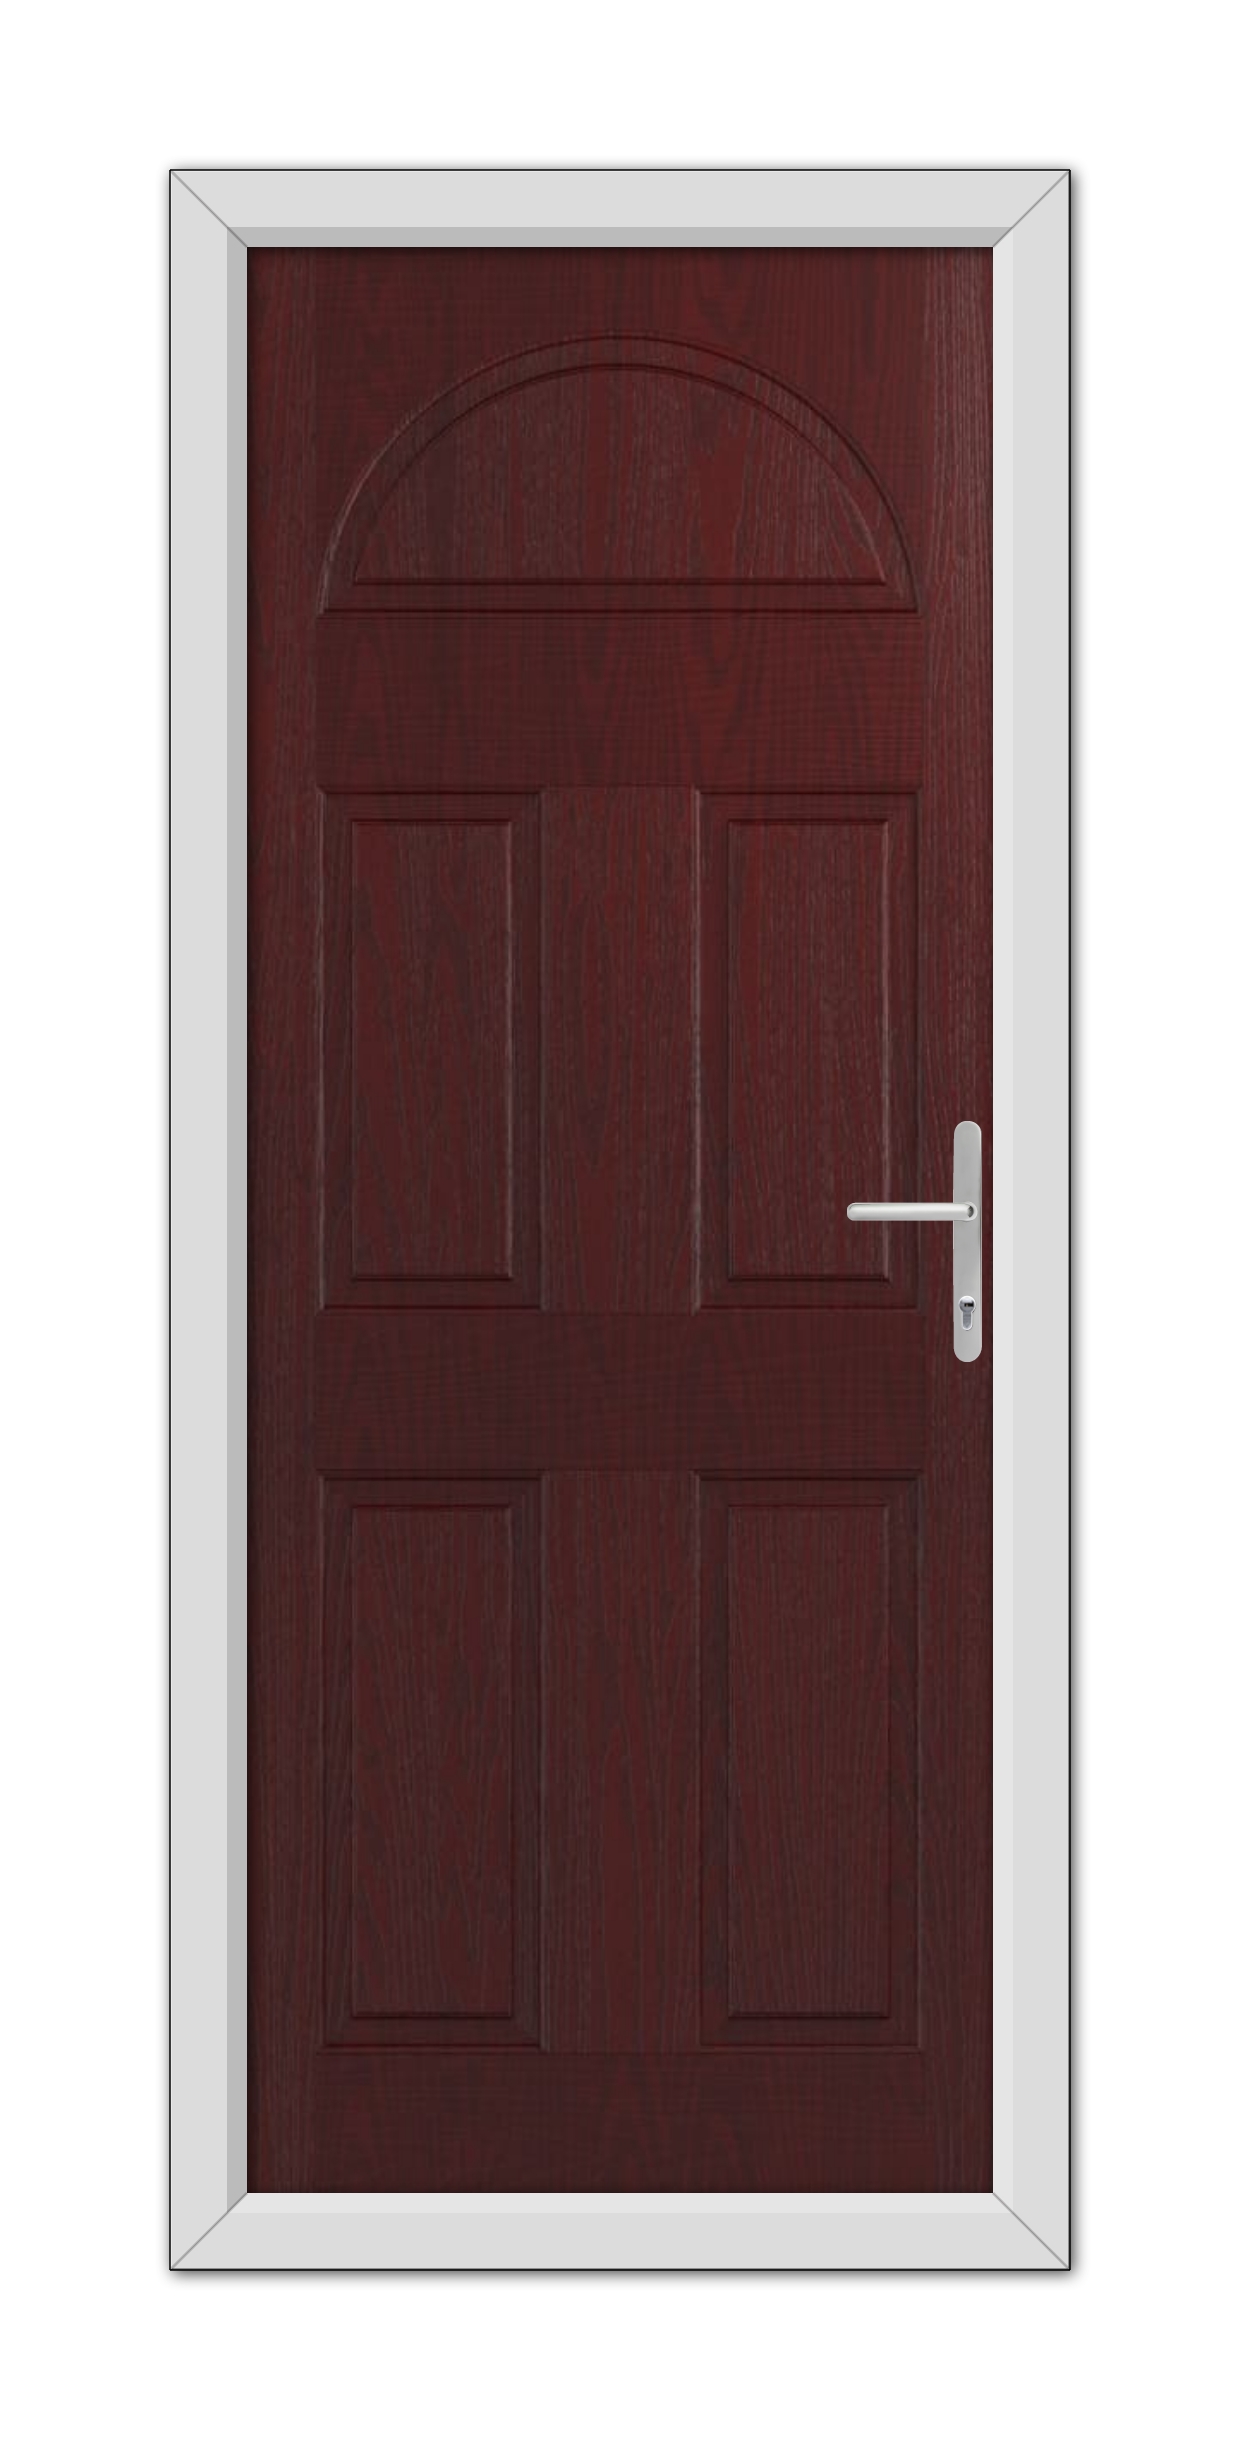 A Rosewood Winslow Solid Composite Door 48mm Timber Core with six panels and a white metal handle, framed by a simple white door frame.